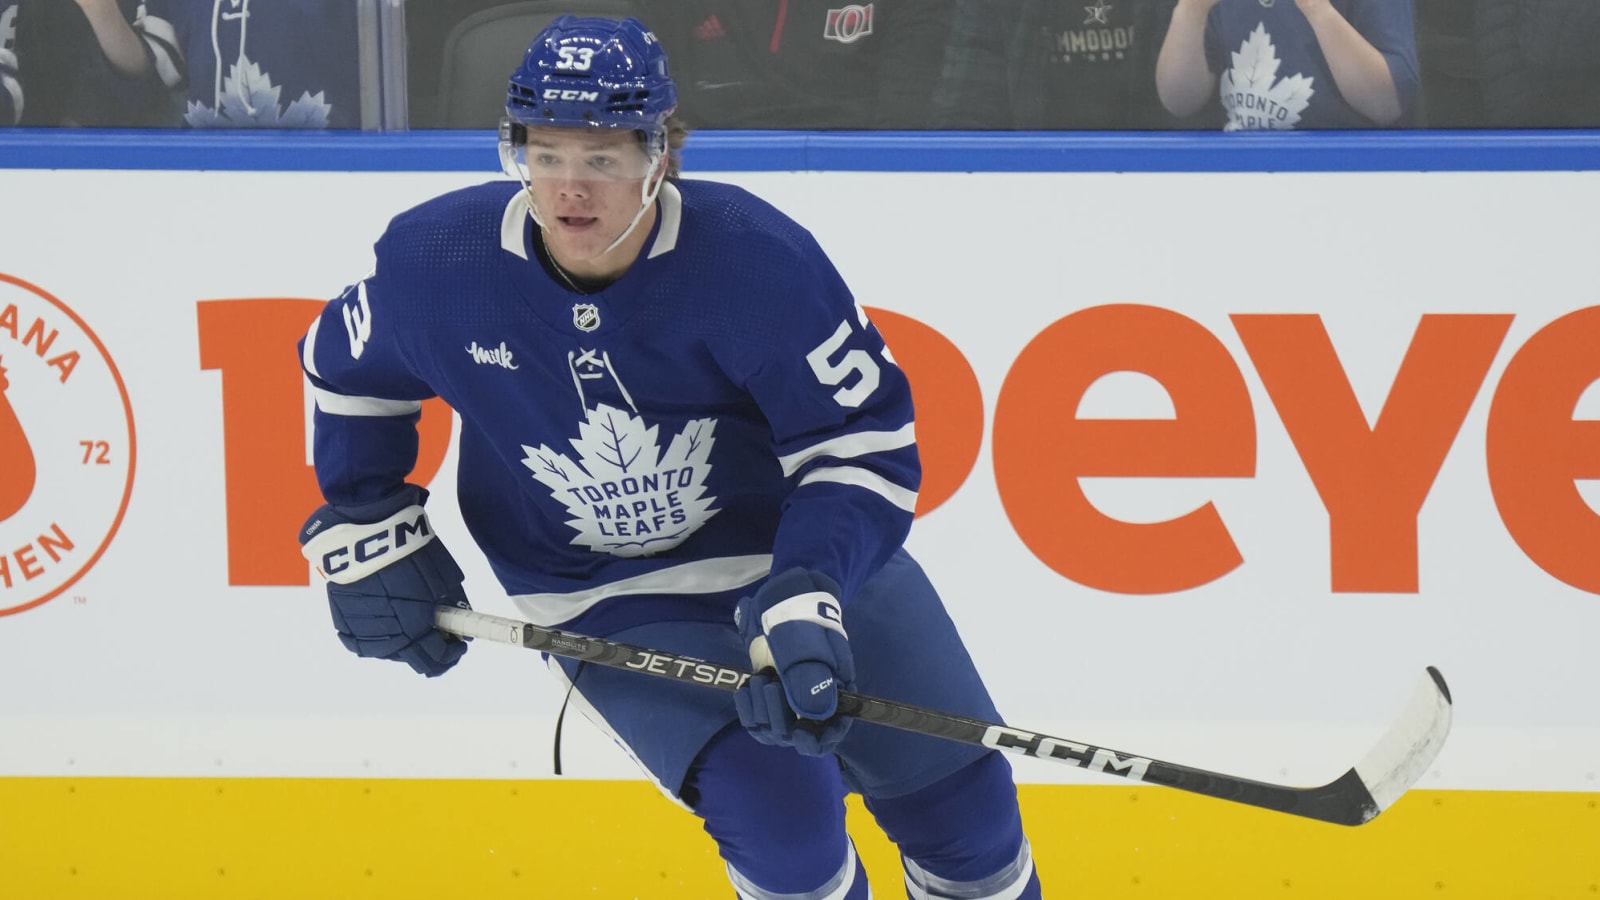 Easton Cowan sees Mitch Marner as a great role model